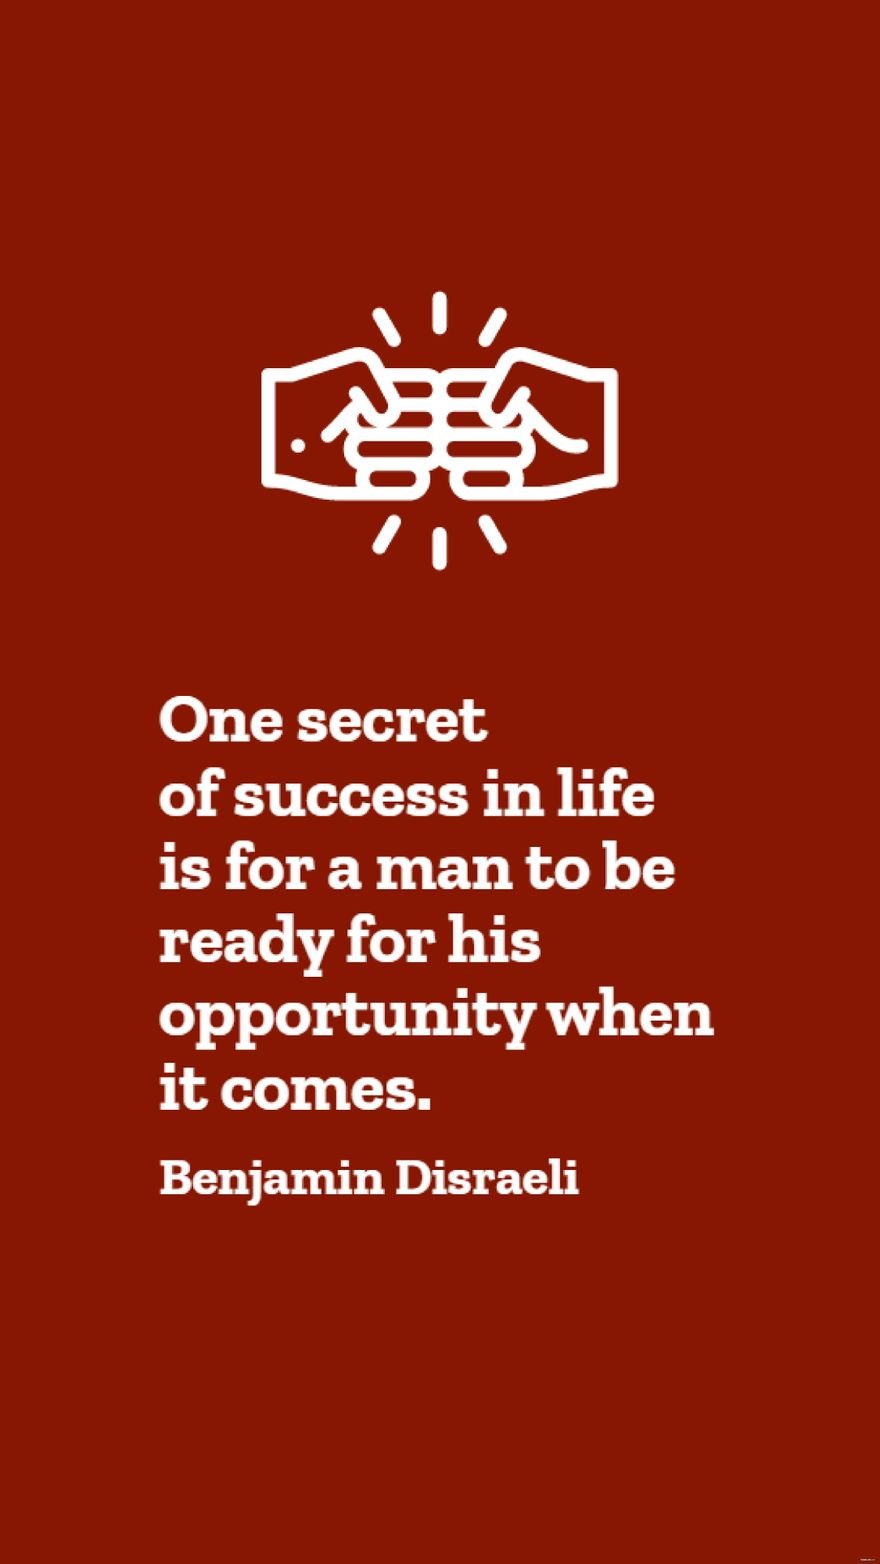 Benjamin Disraeli - One secret of success in life is for a man to be ready for his opportunity when it comes.